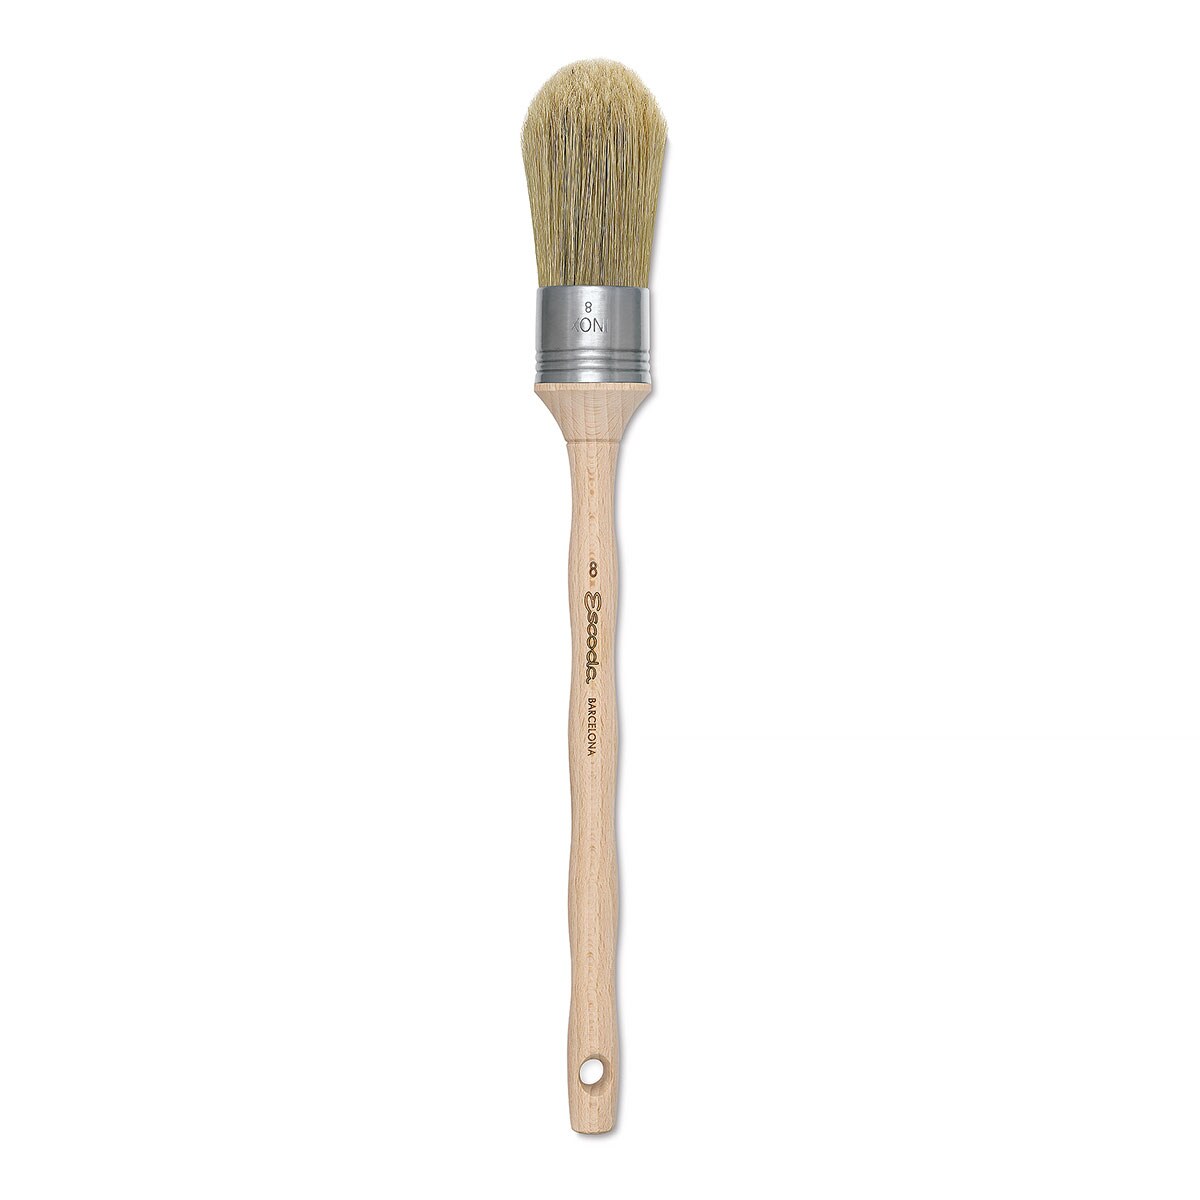 scoda Natural Bristle Brushes - Round Domed, Size 8, Long Handle